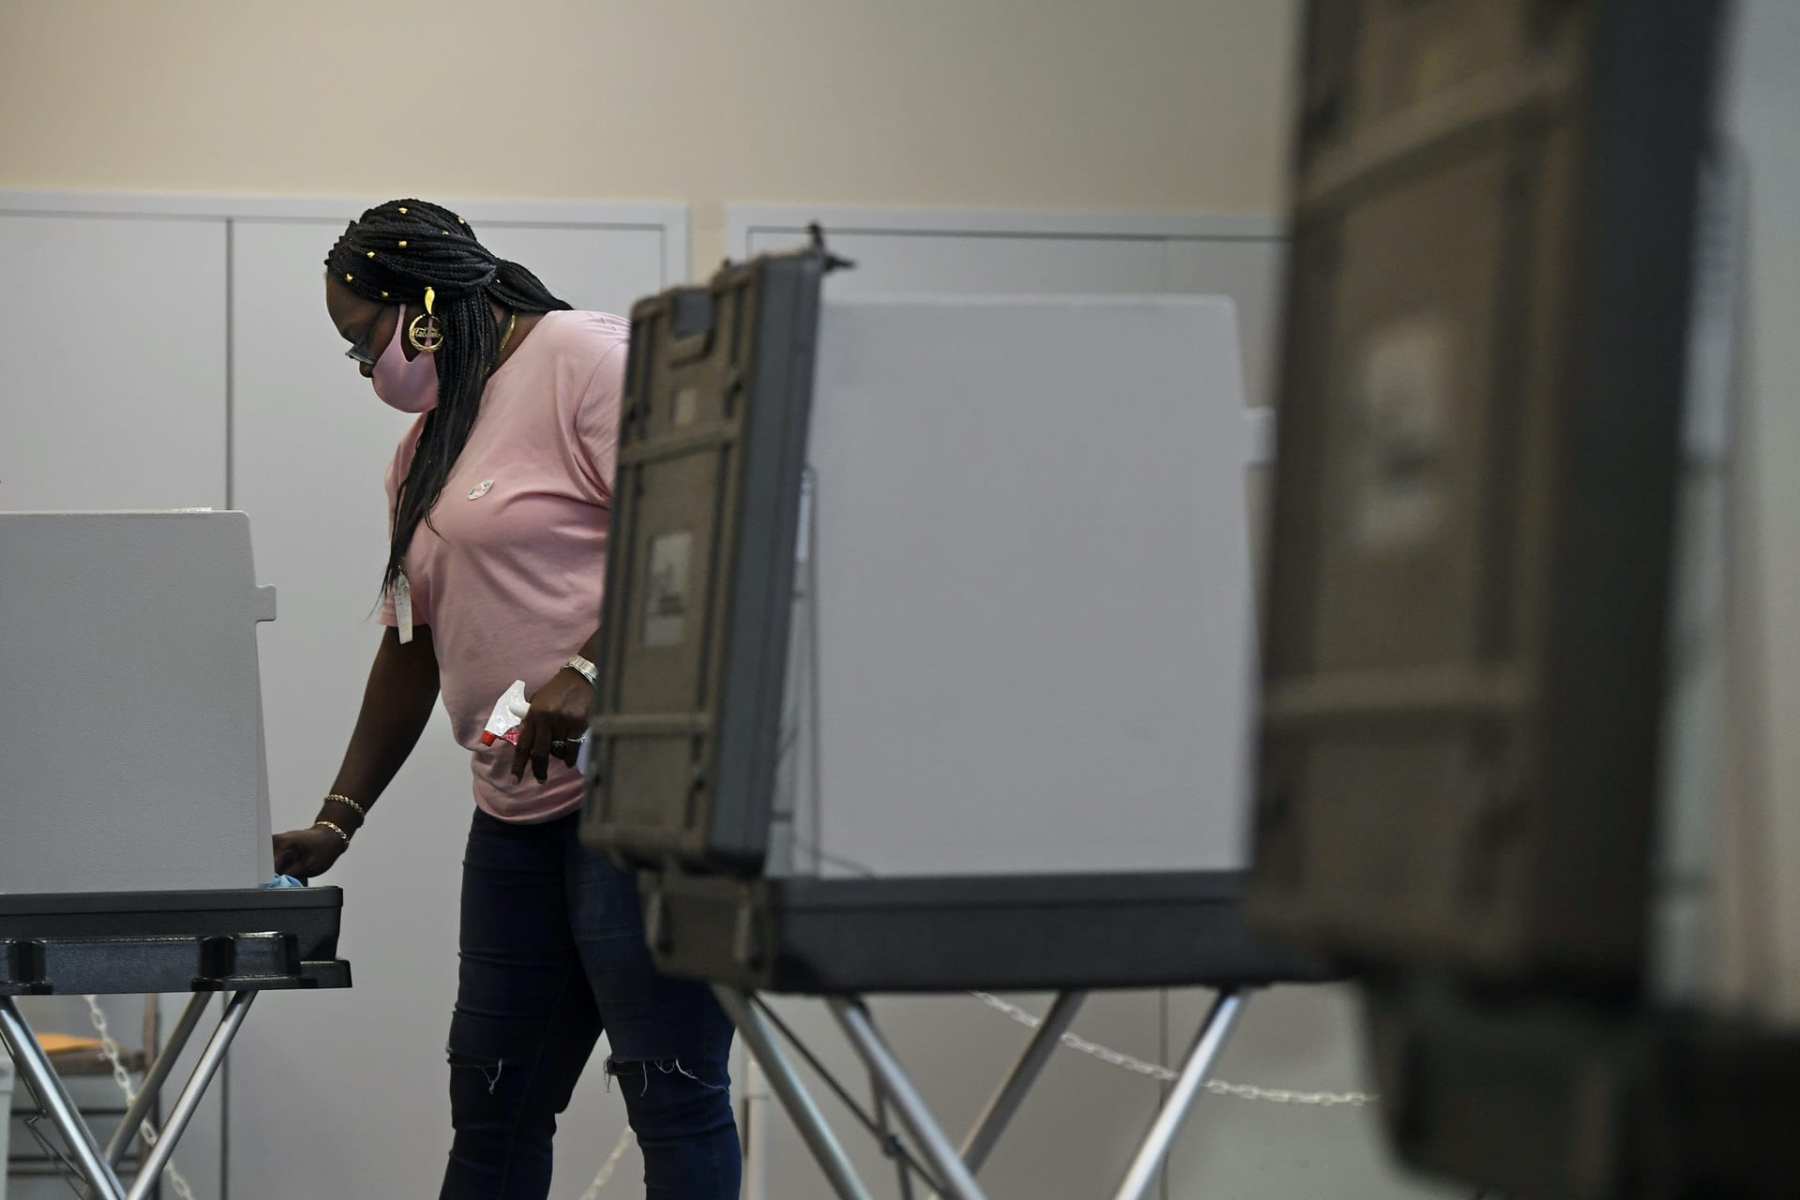 A woman cleans a voting booth.